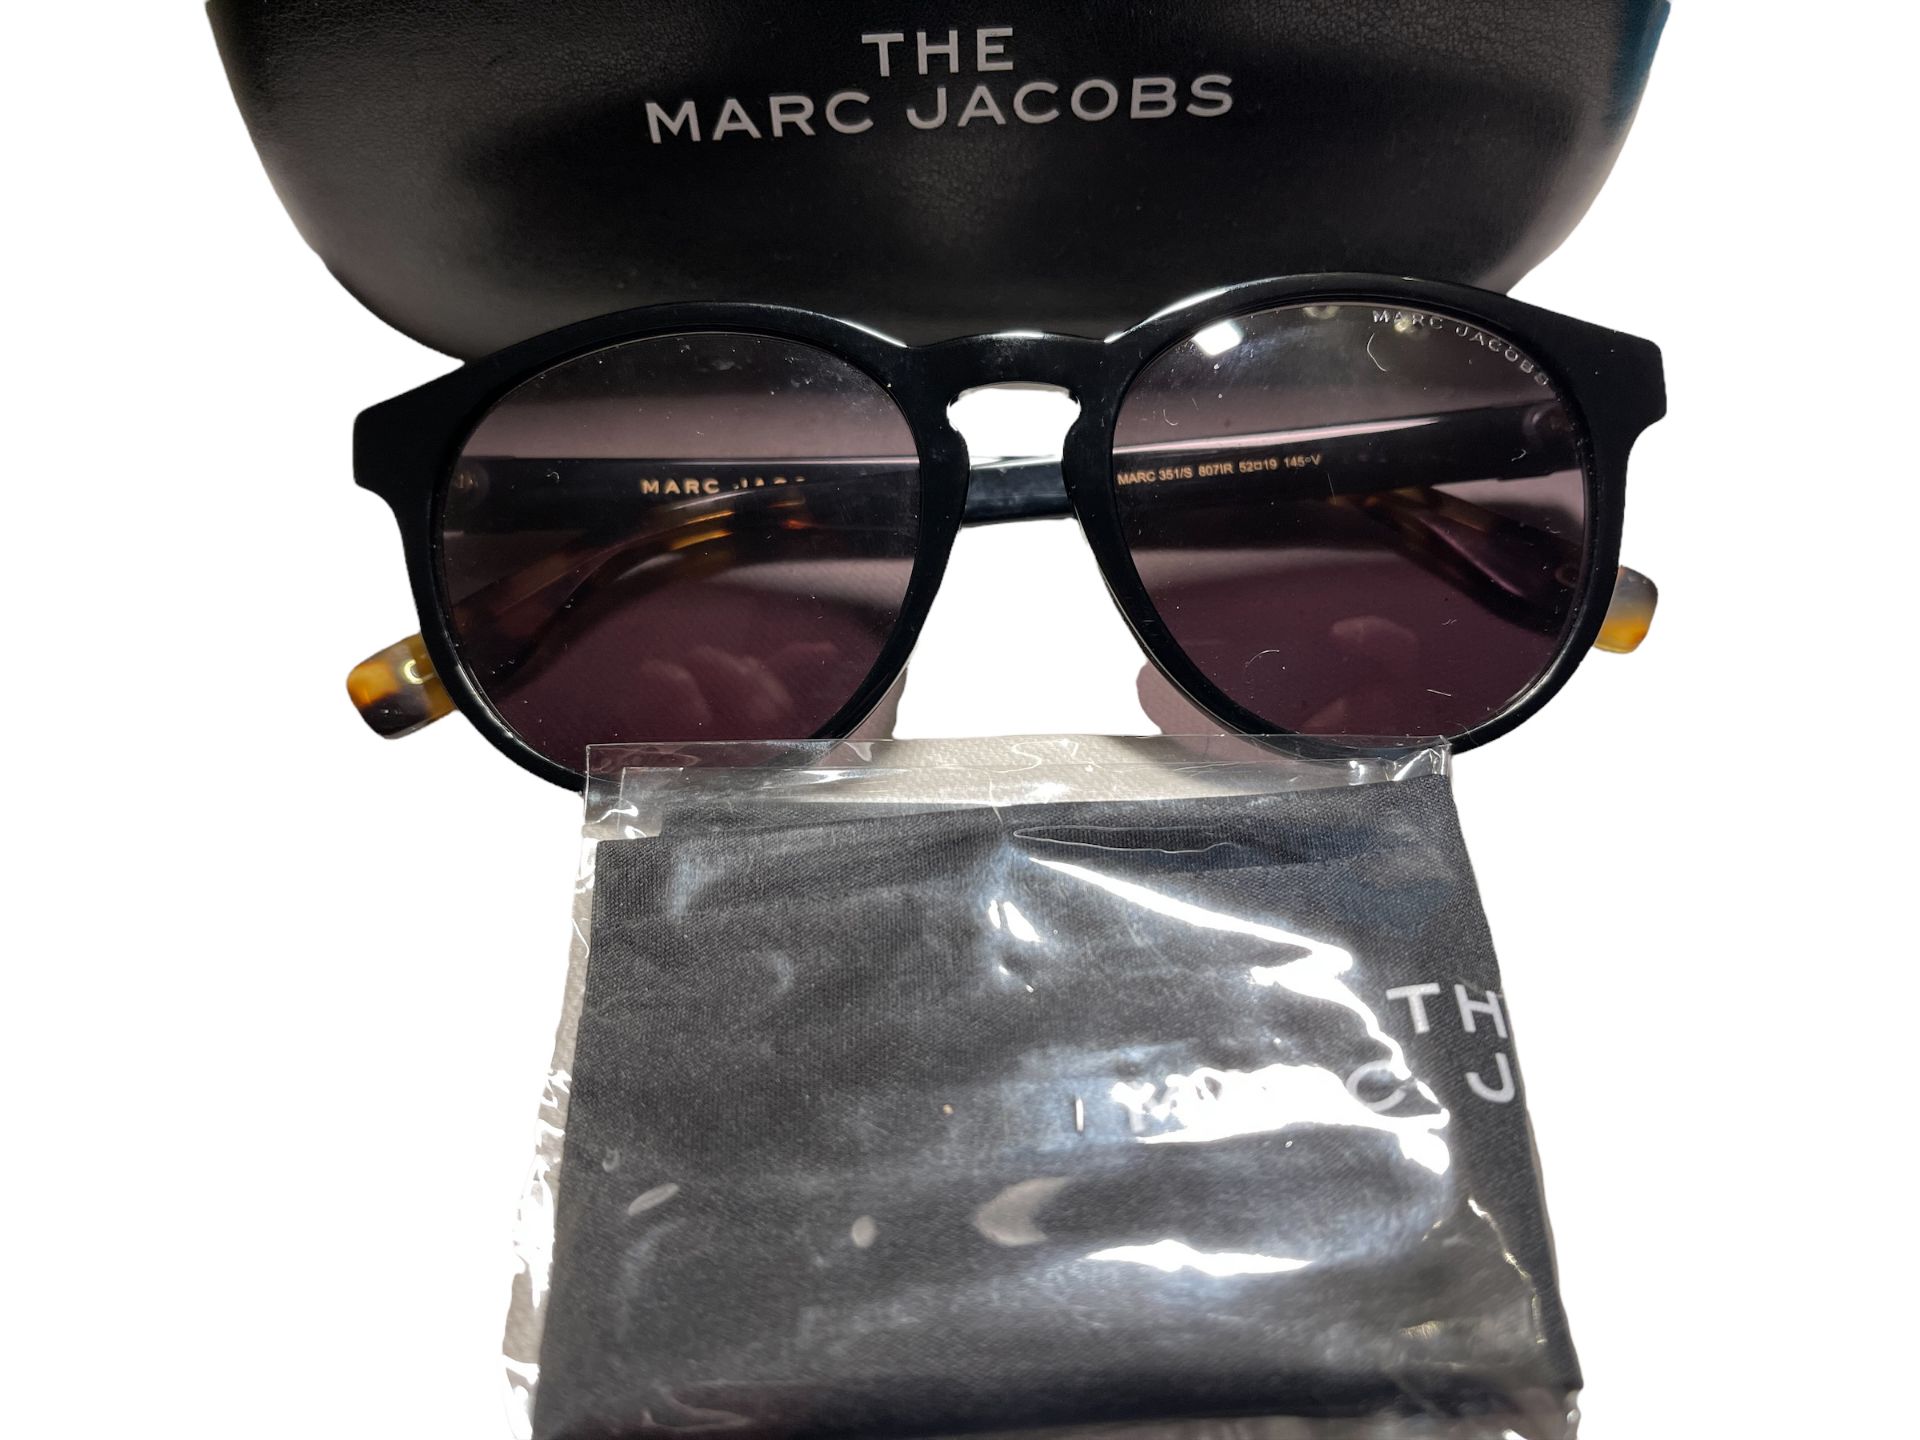 Marc Jacobs Ladies Sunglasses - Ex Demo or Surplus Stock from our Private Jet Charter - Image 3 of 10